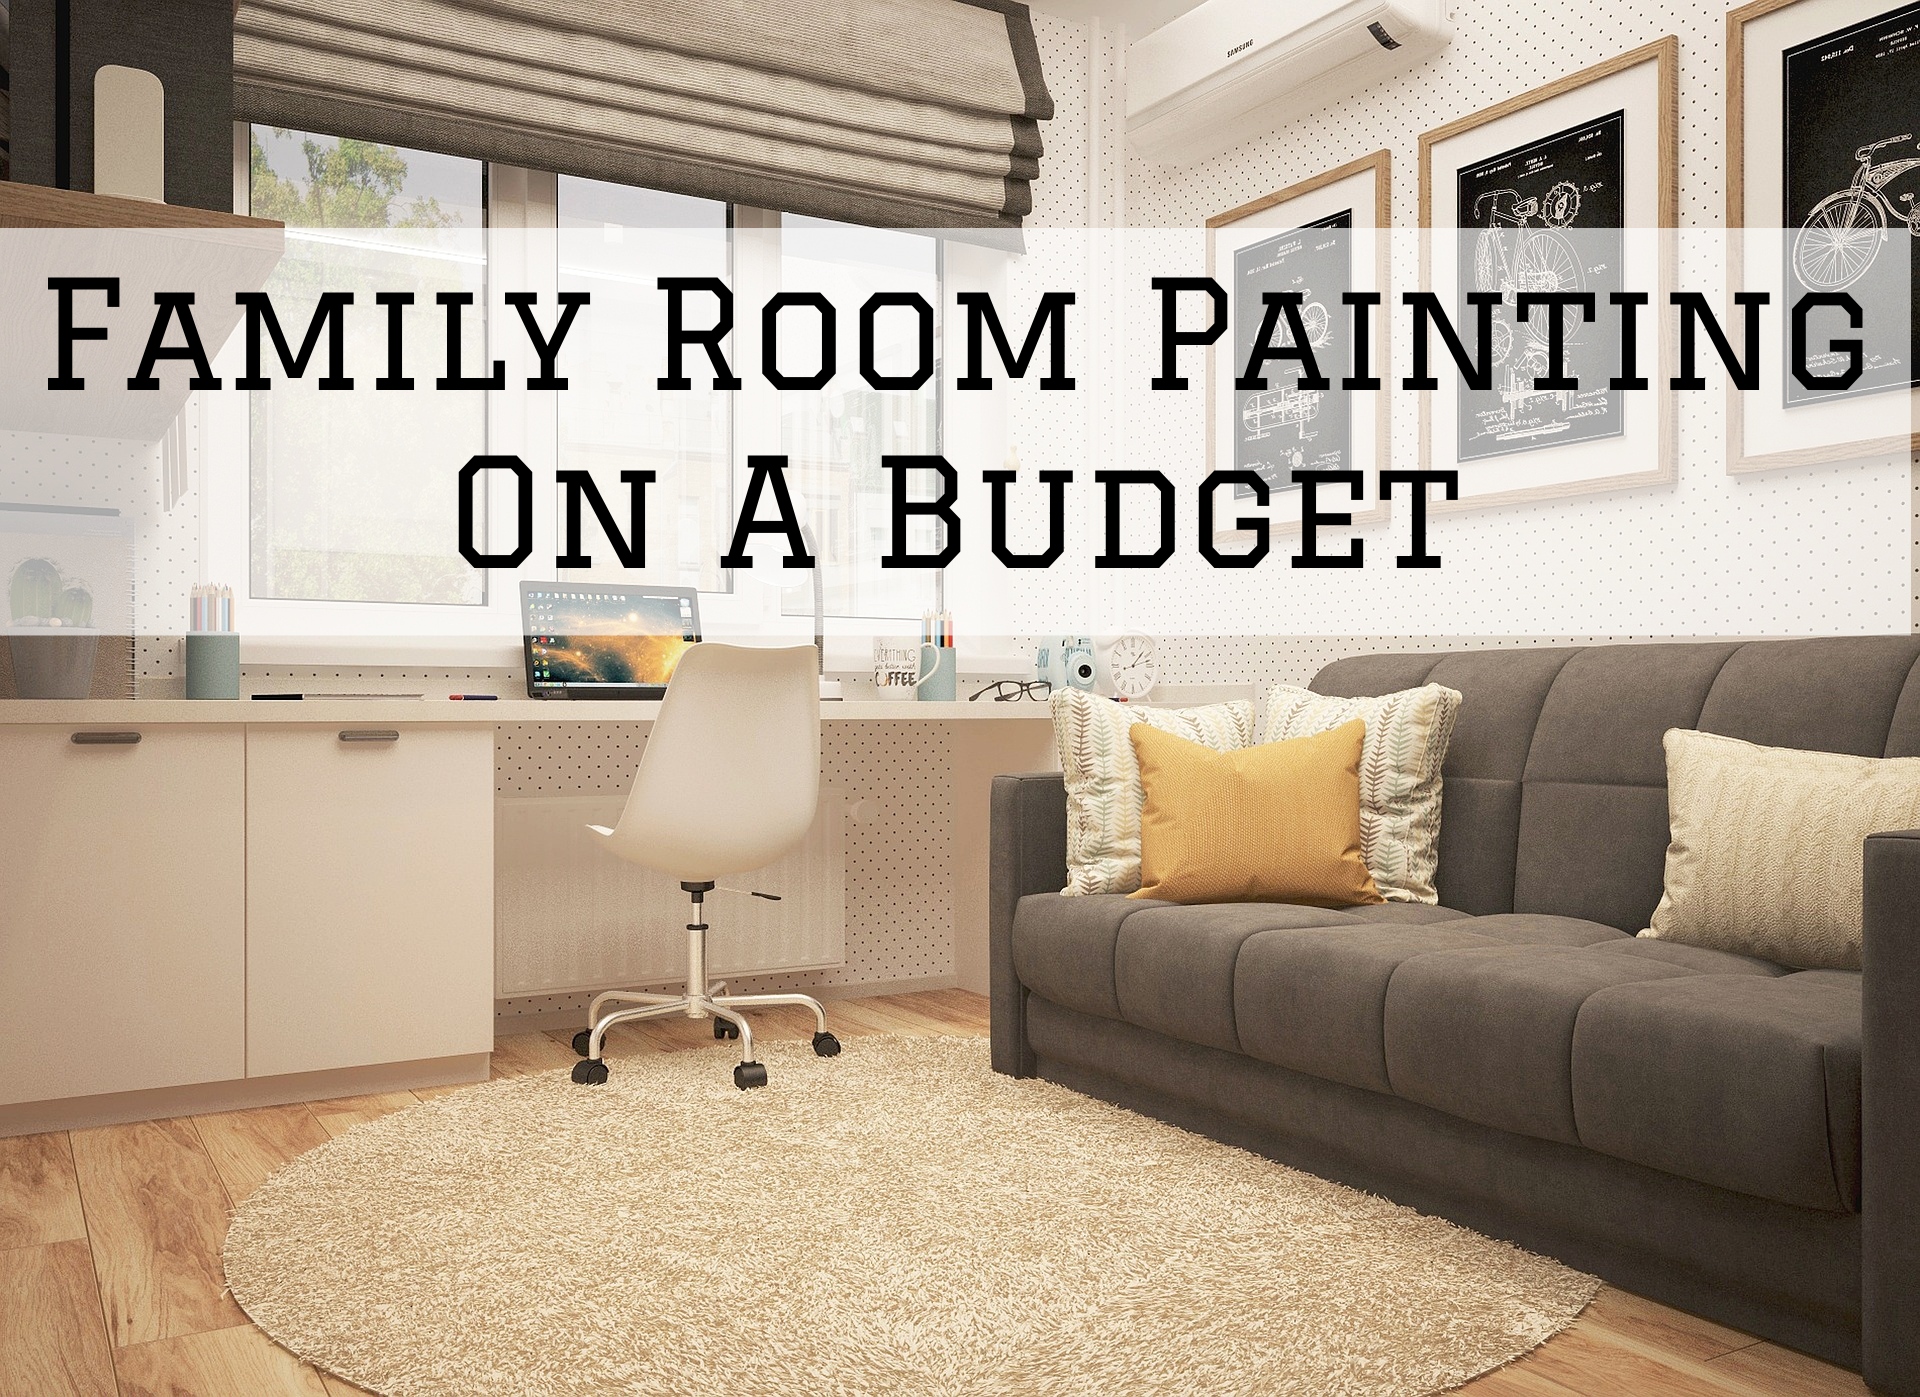 2023-02-11 Left Moon Painting Pocopson PA Family Room Painting Budget